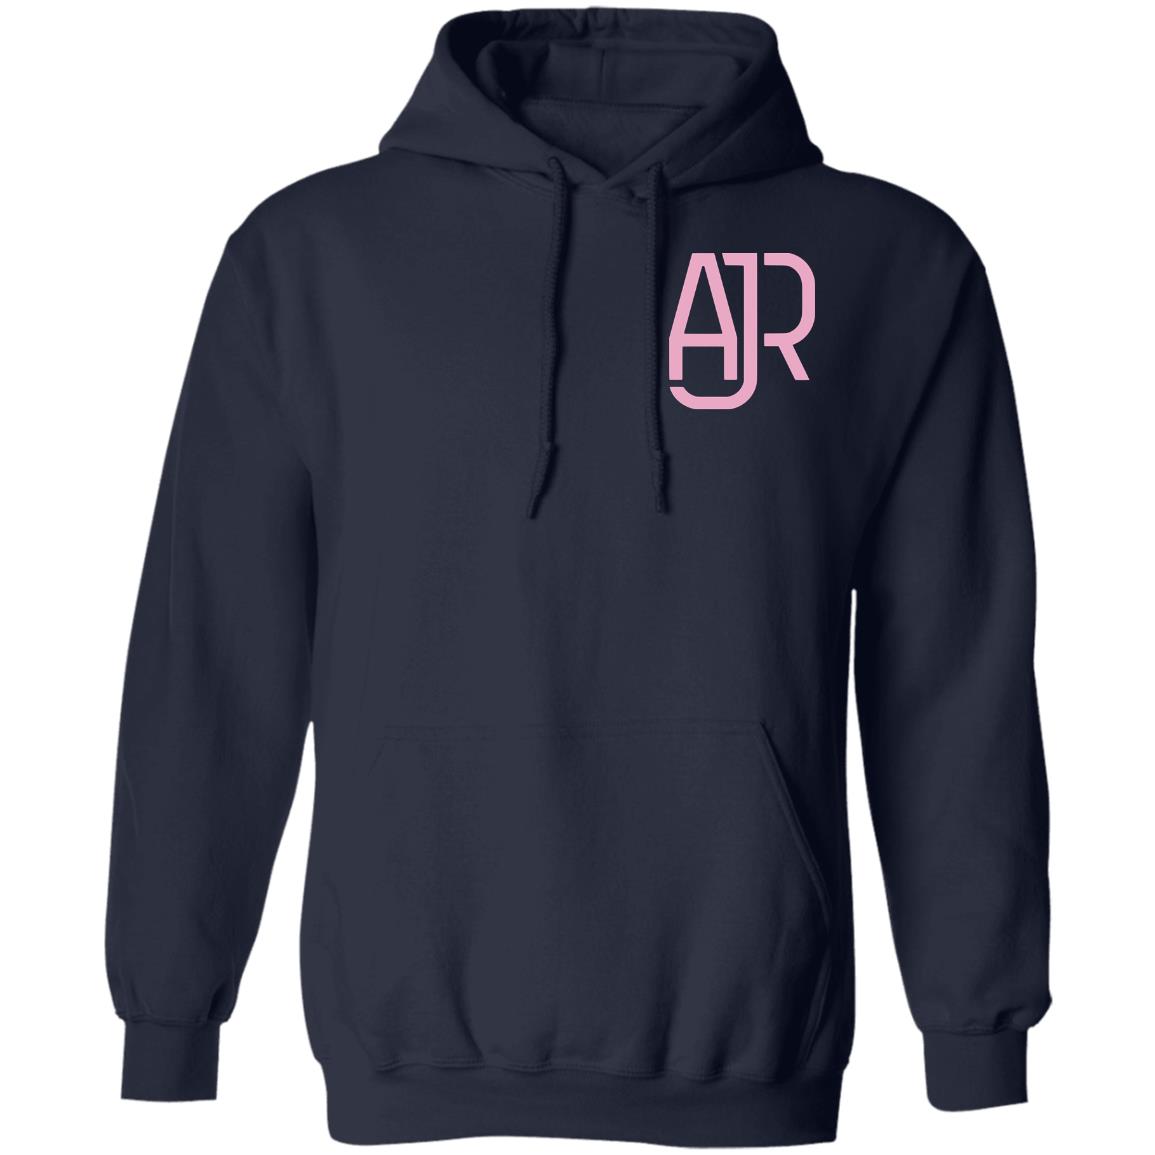 100 Bad Days - Ajr - Kids Pullover Hoodies sold by Querida